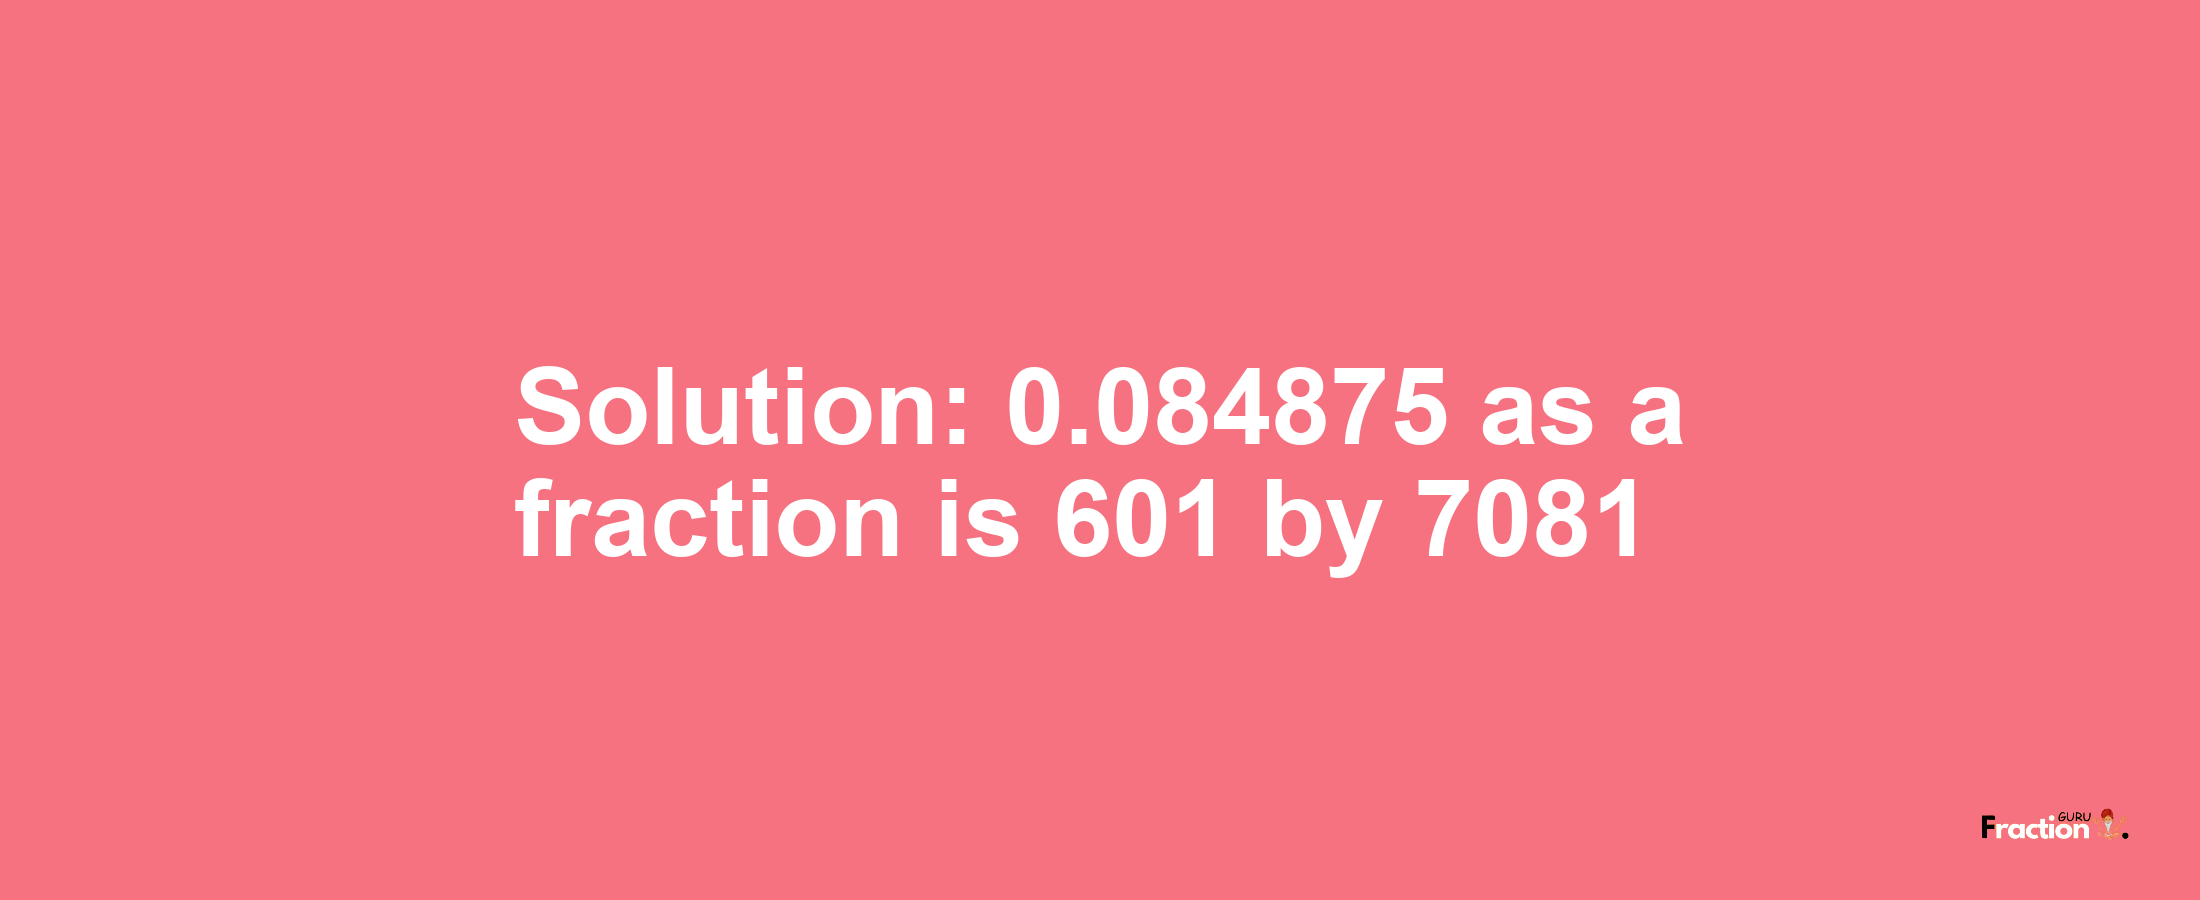 Solution:0.084875 as a fraction is 601/7081